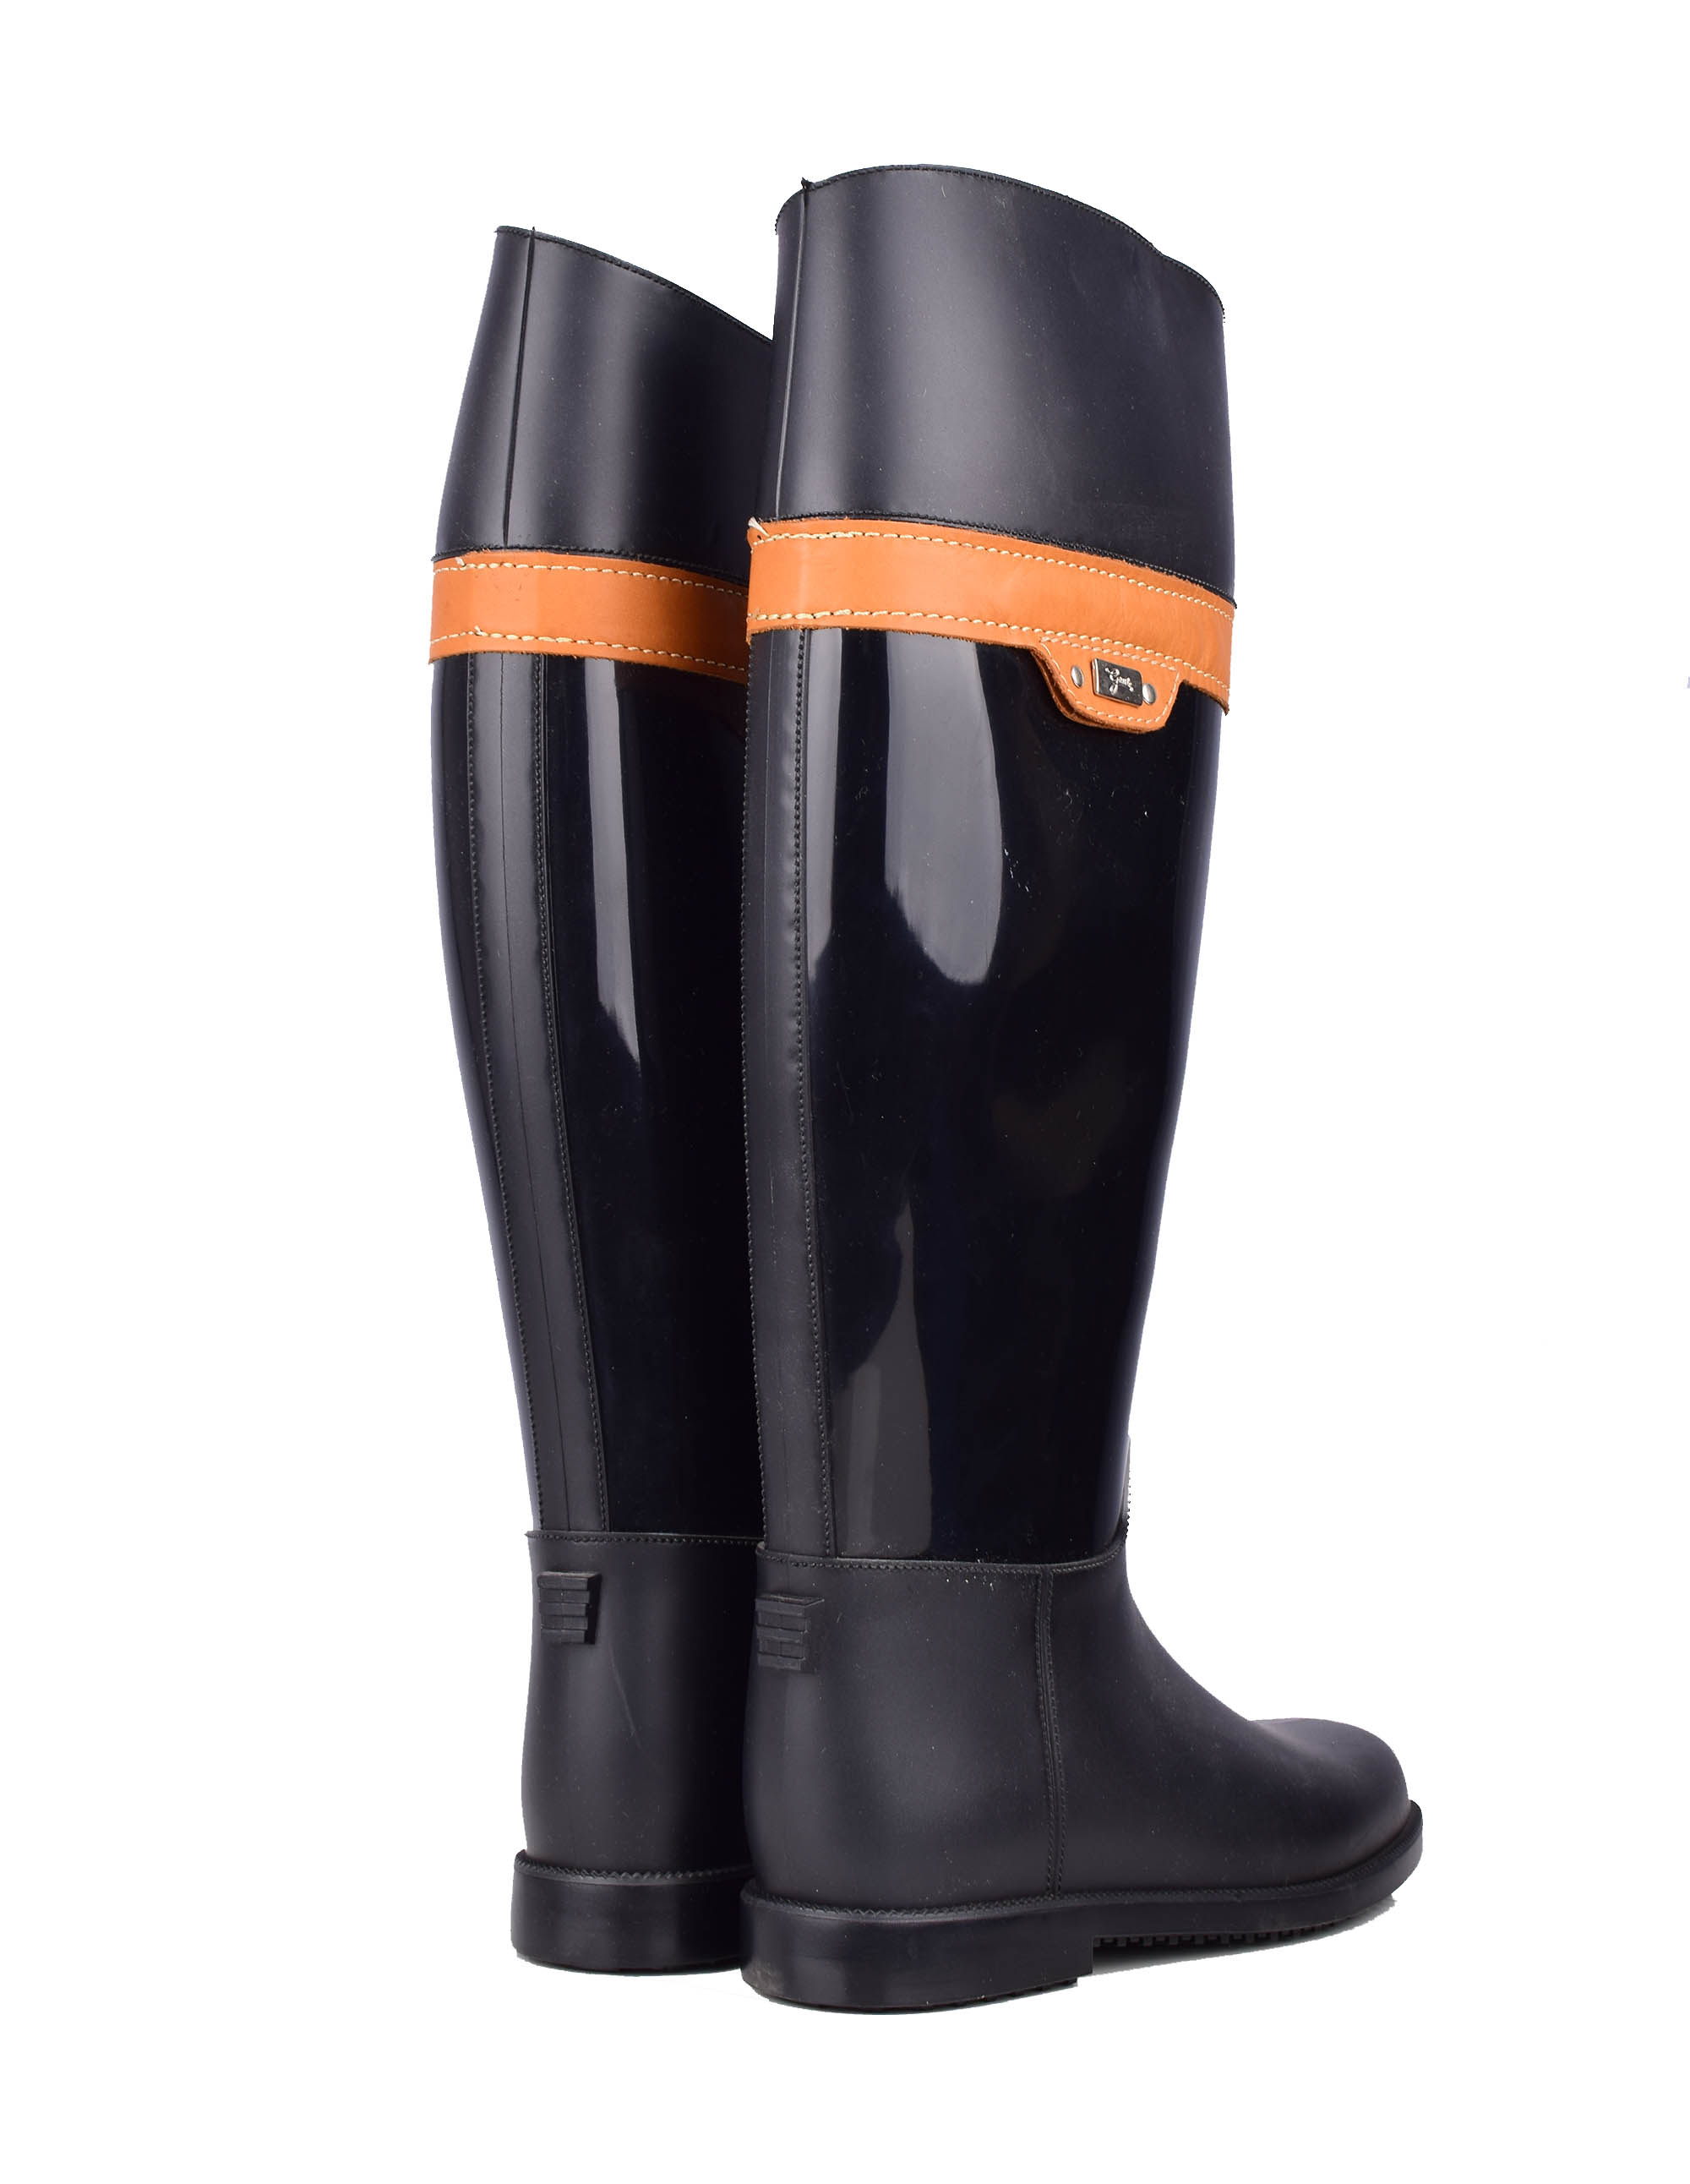 GANT WOMAN RUBBER BOOT RIDING | Christmas Gifts με -20% Έκπτωση ...